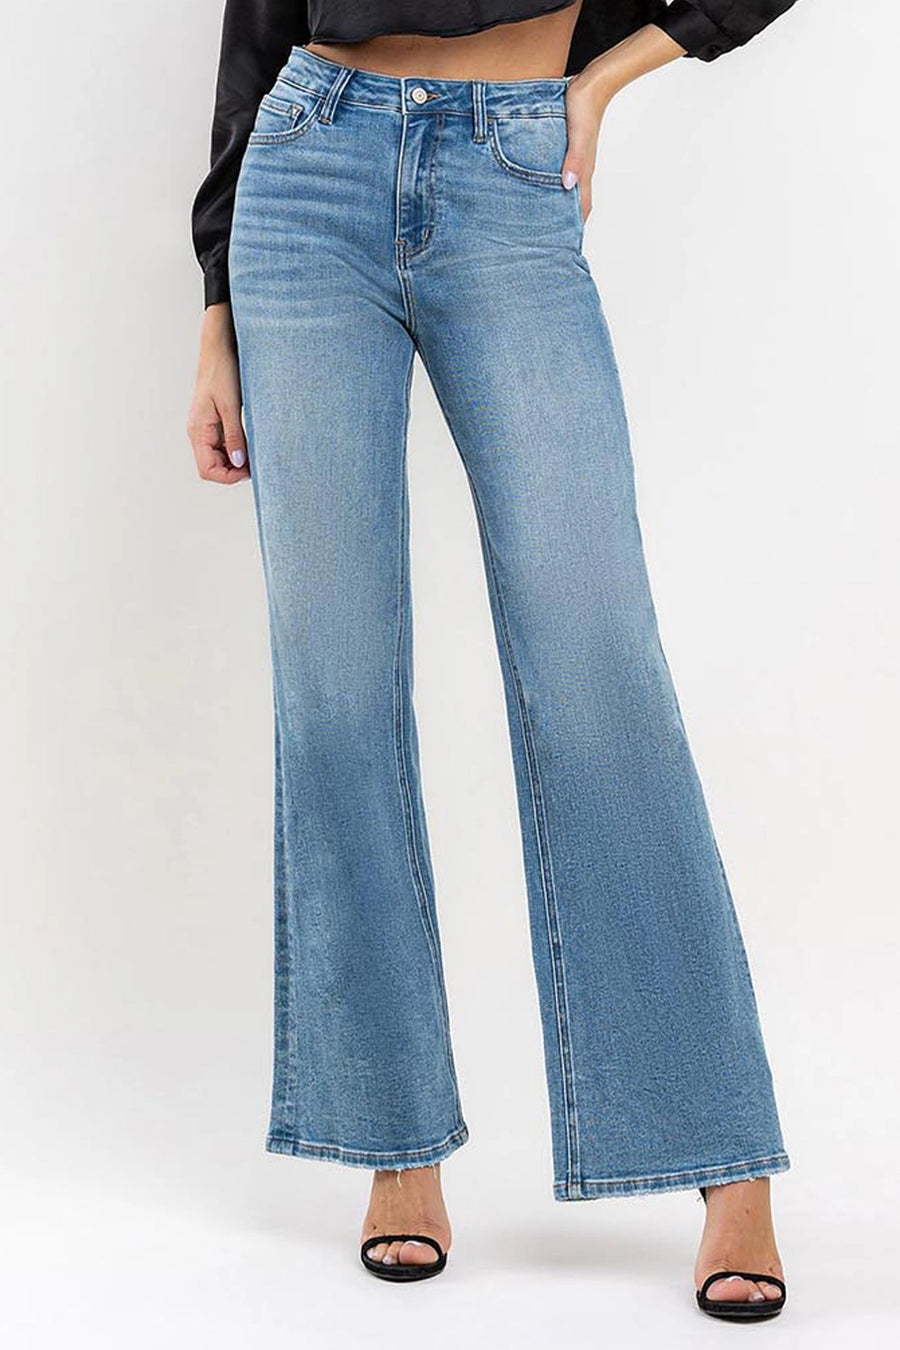 They Were Made For Me Jeans (Medium Wash)